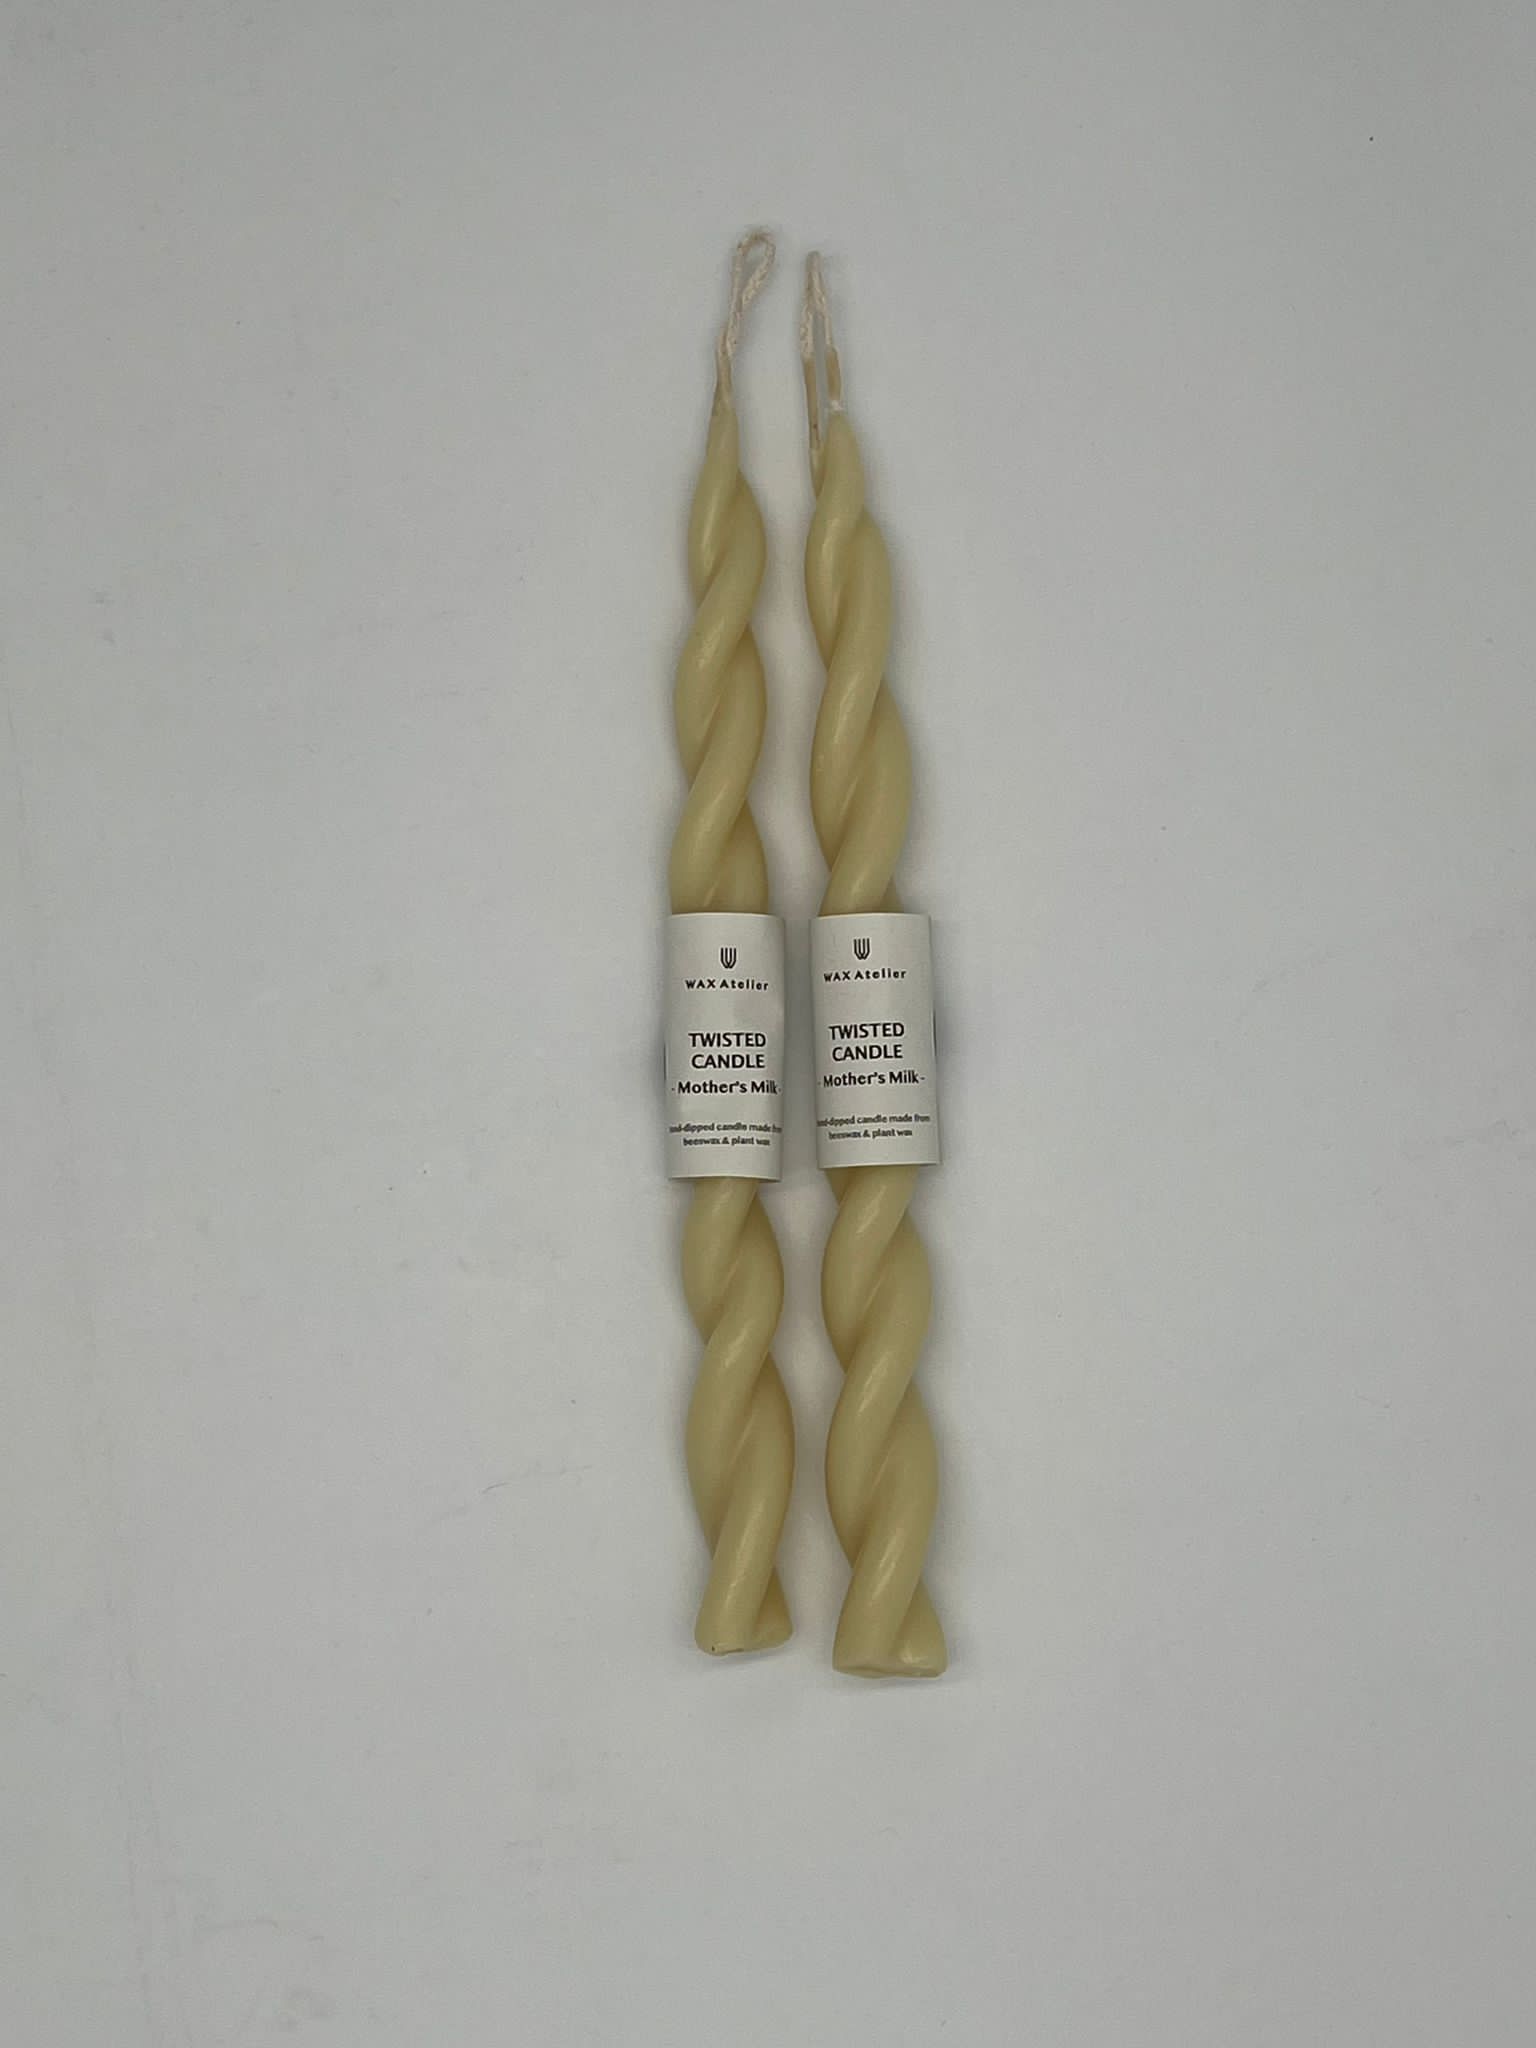 Wax Atelier Twisted Candle Pair